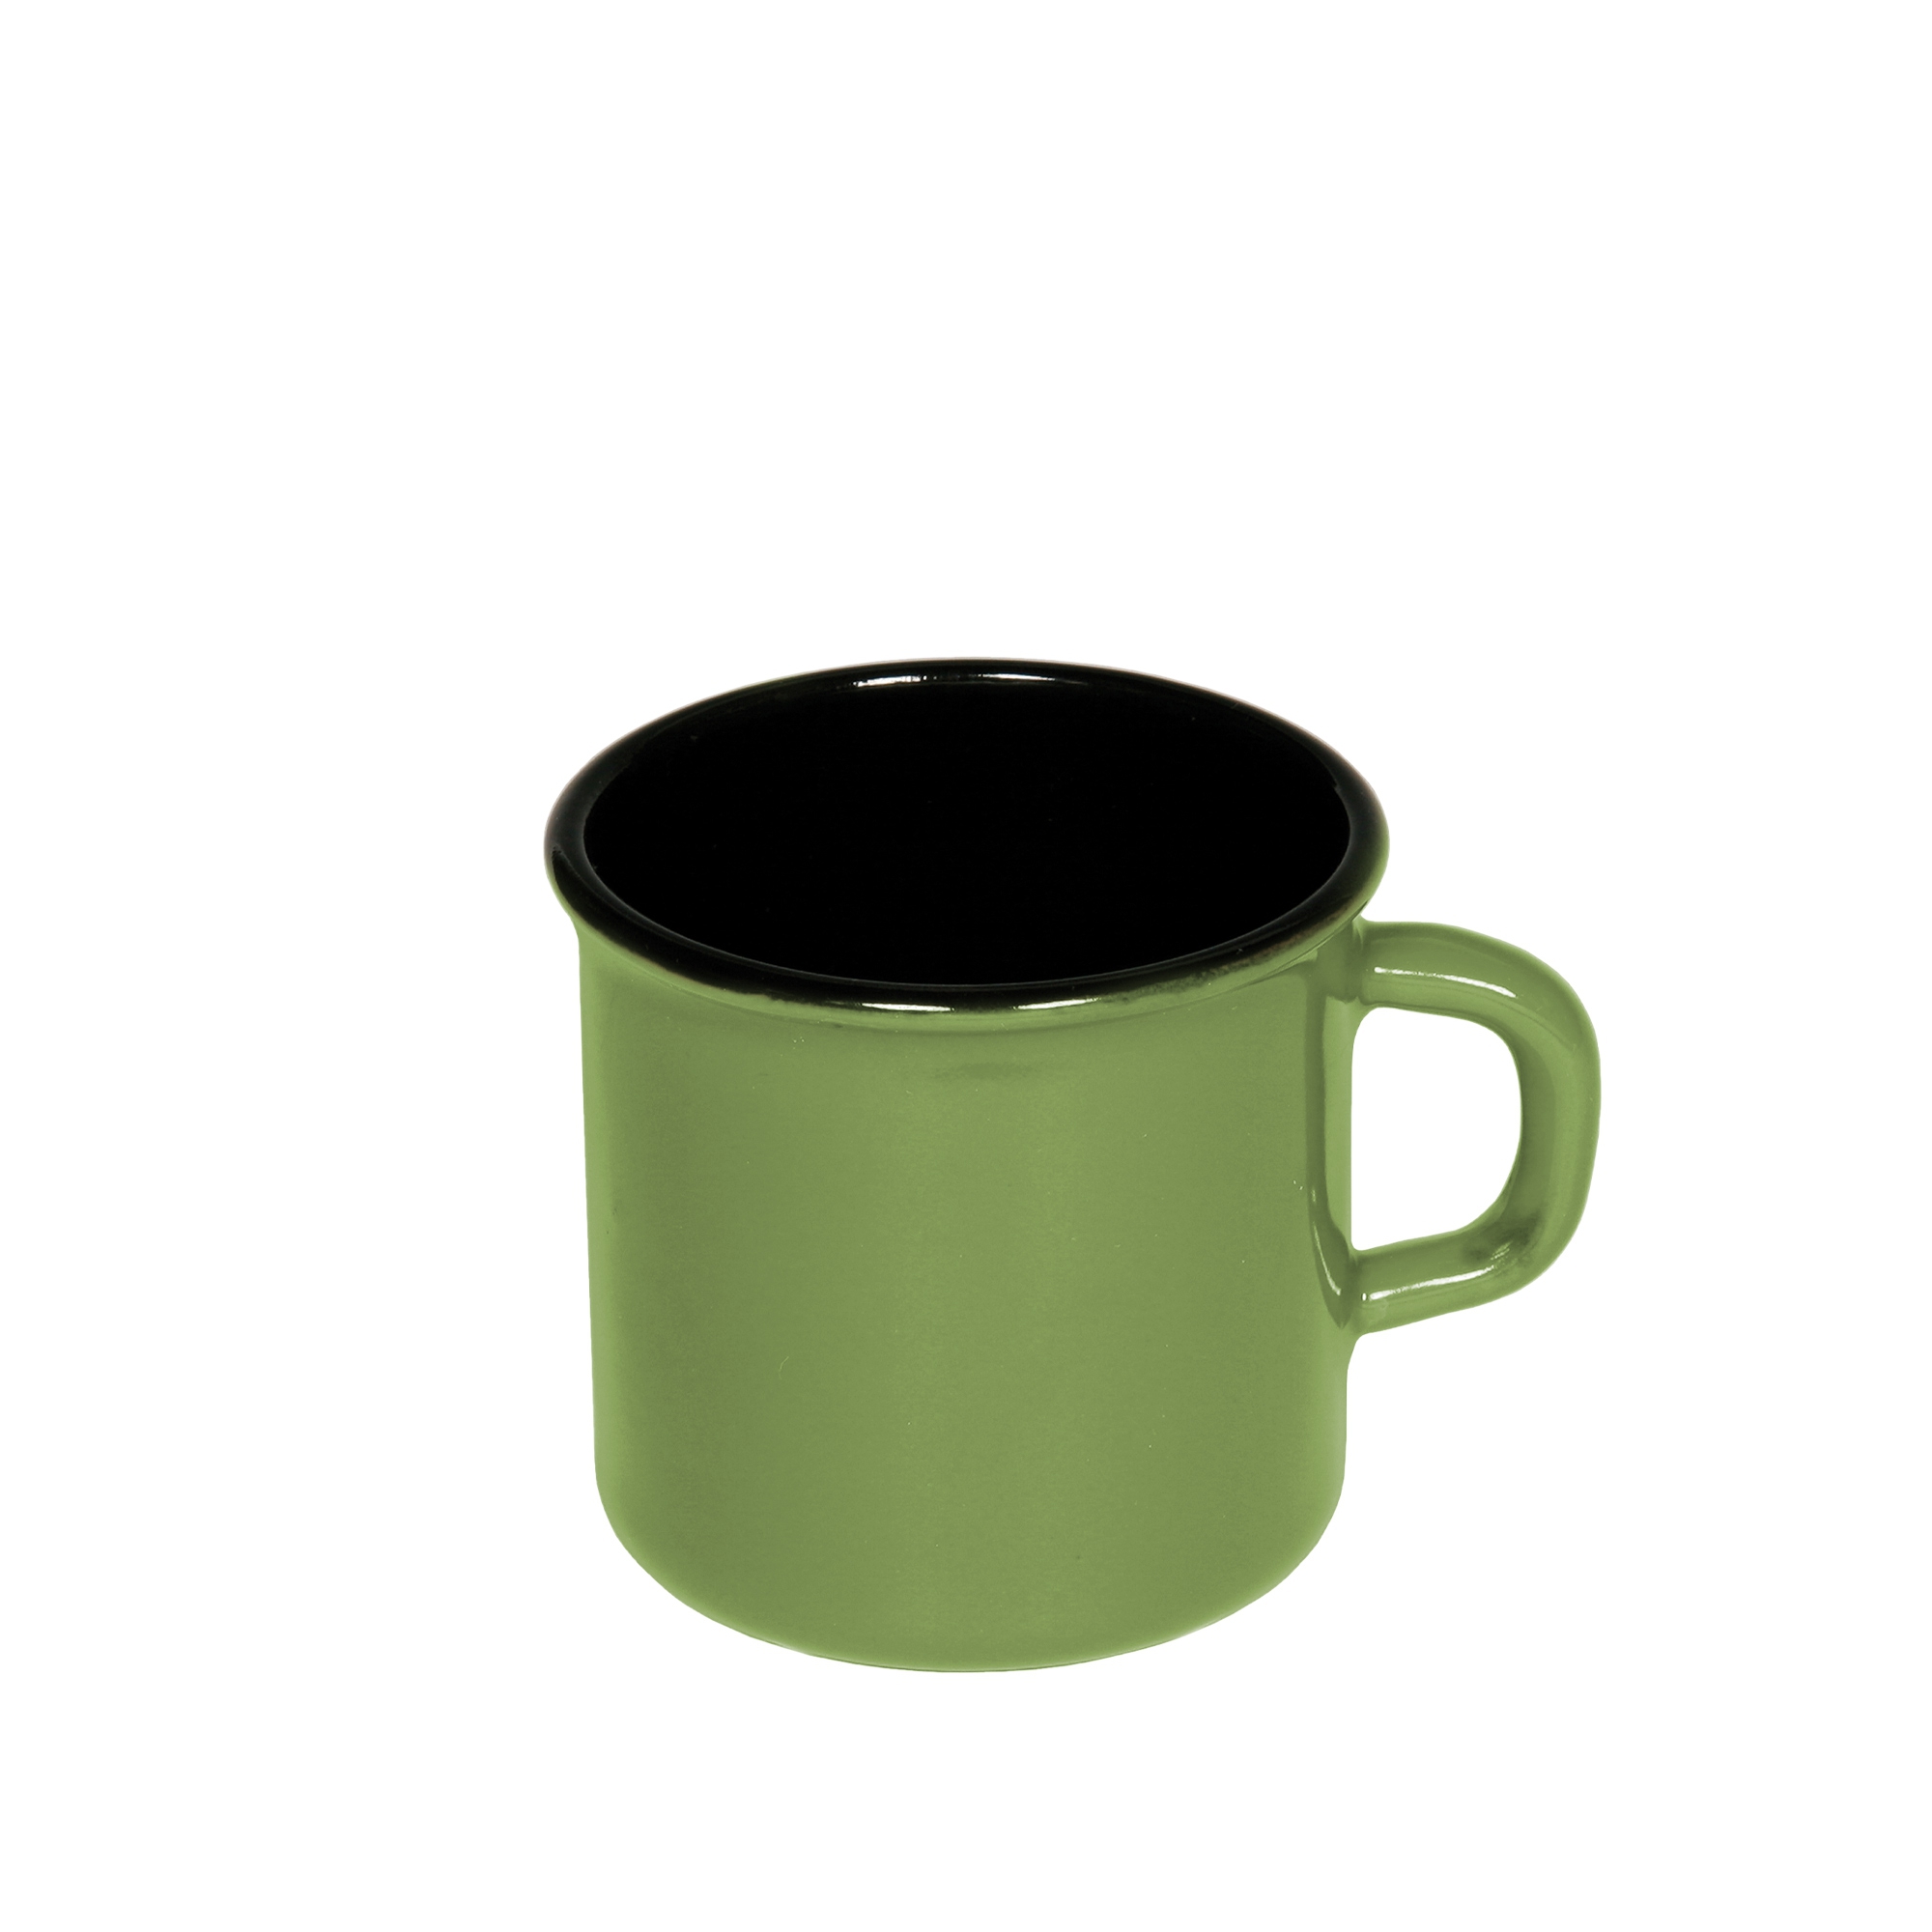 Riess - pot with flange/drinking cup green